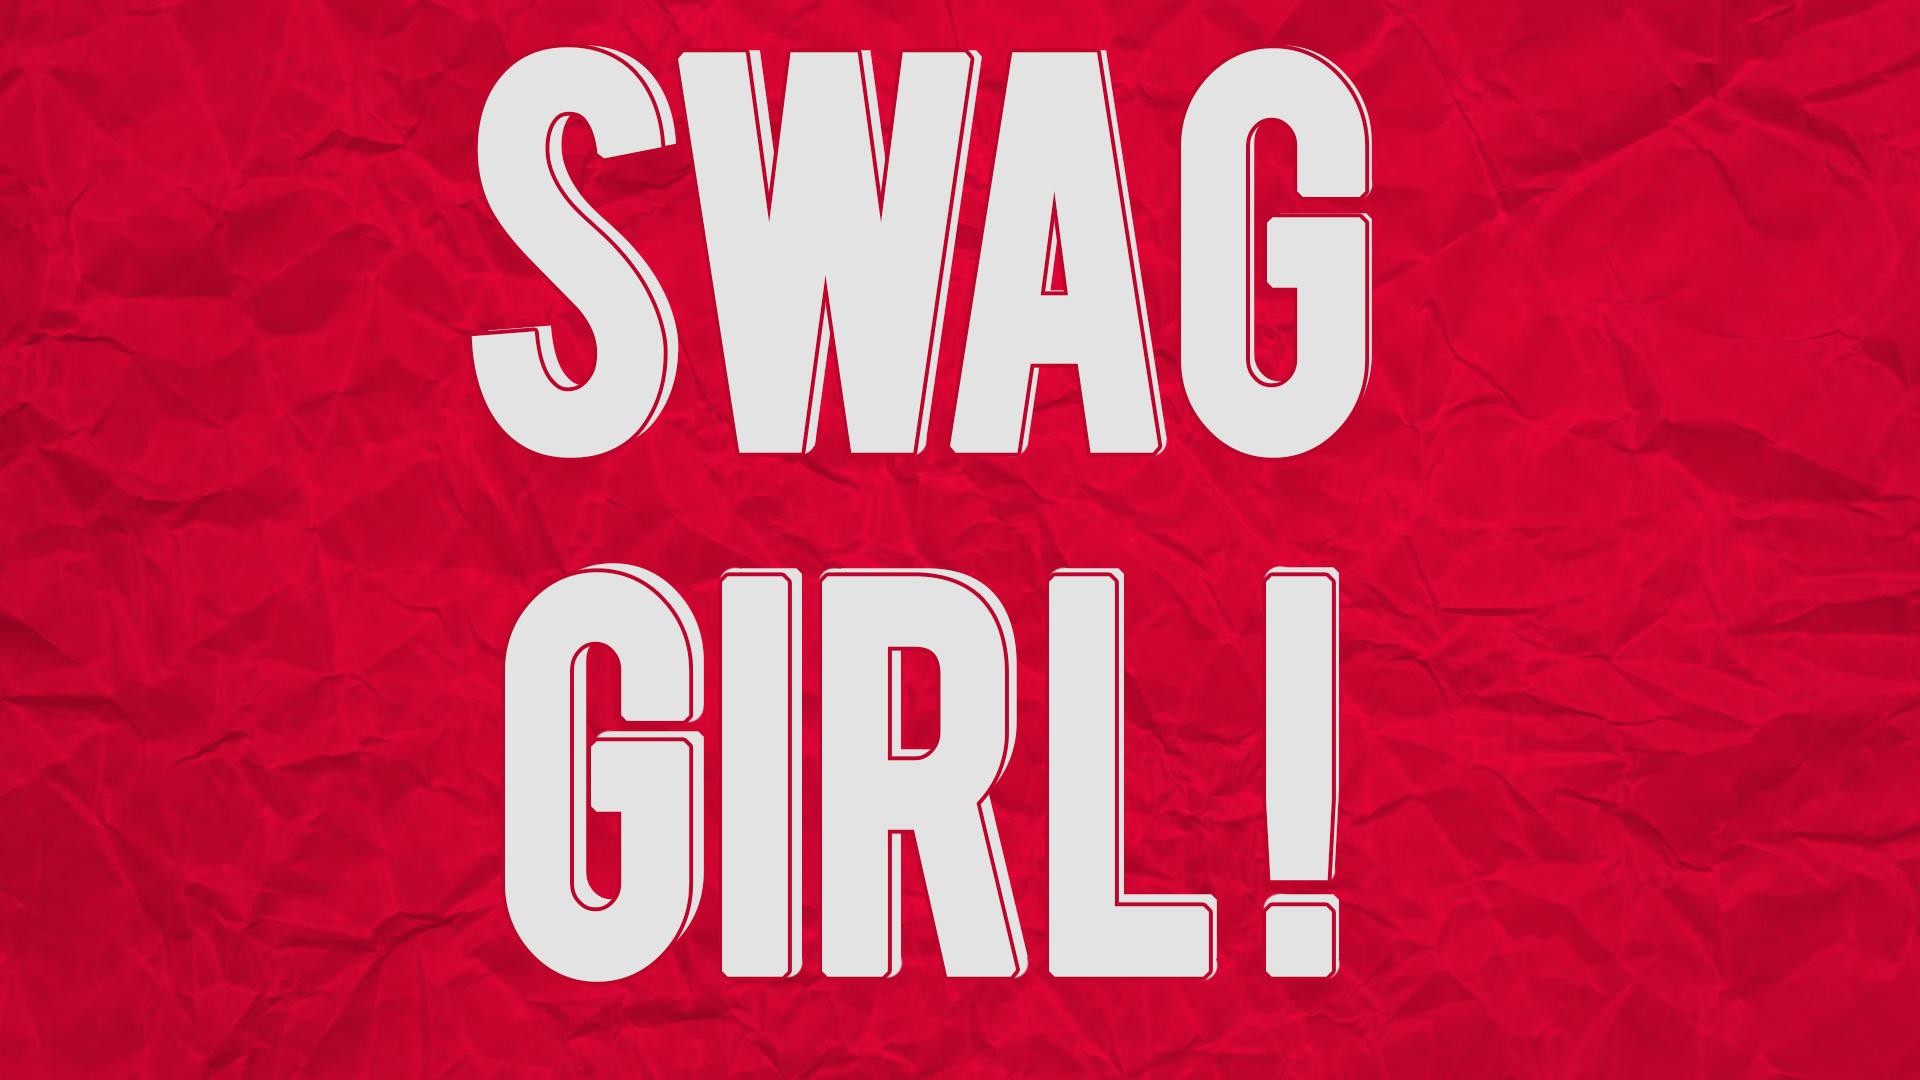 Awesome Girly Wallpaper Wp2002669 - Swag Wallpaper Hd For Girls - HD Wallpaper 